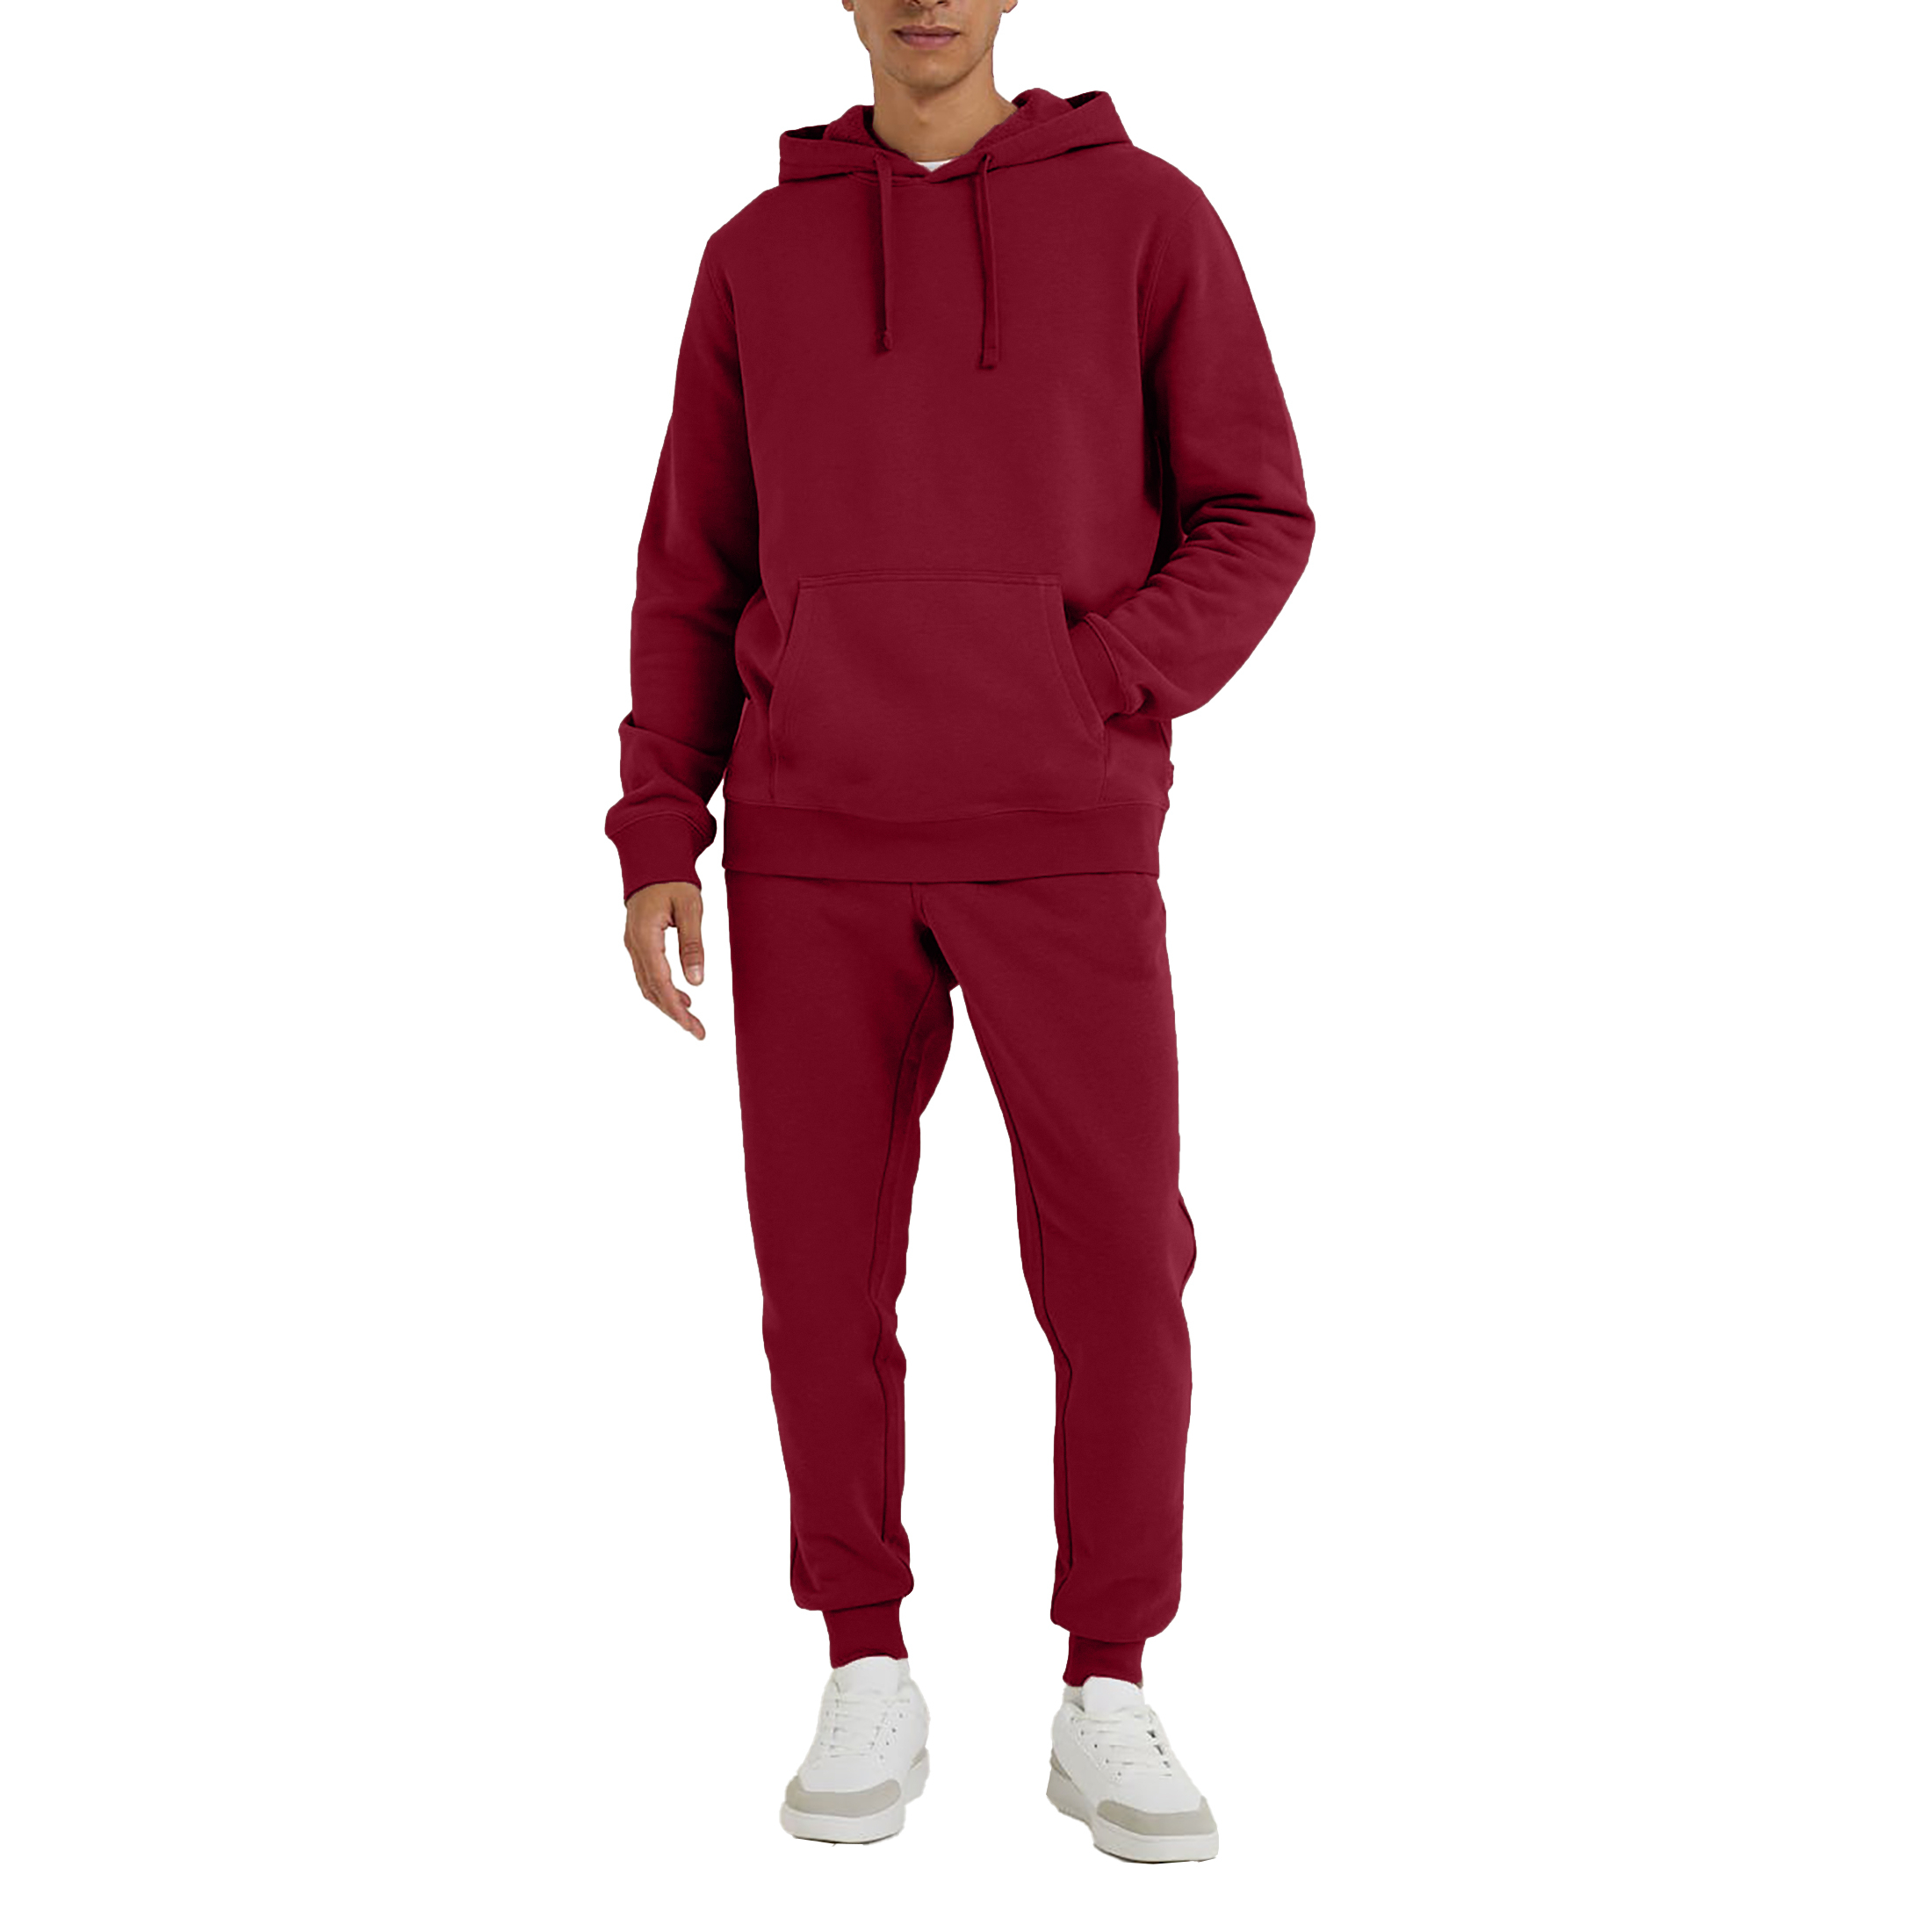 Men's Athletic Warm Jogging Pullover Active Tracksuit - Red, Small